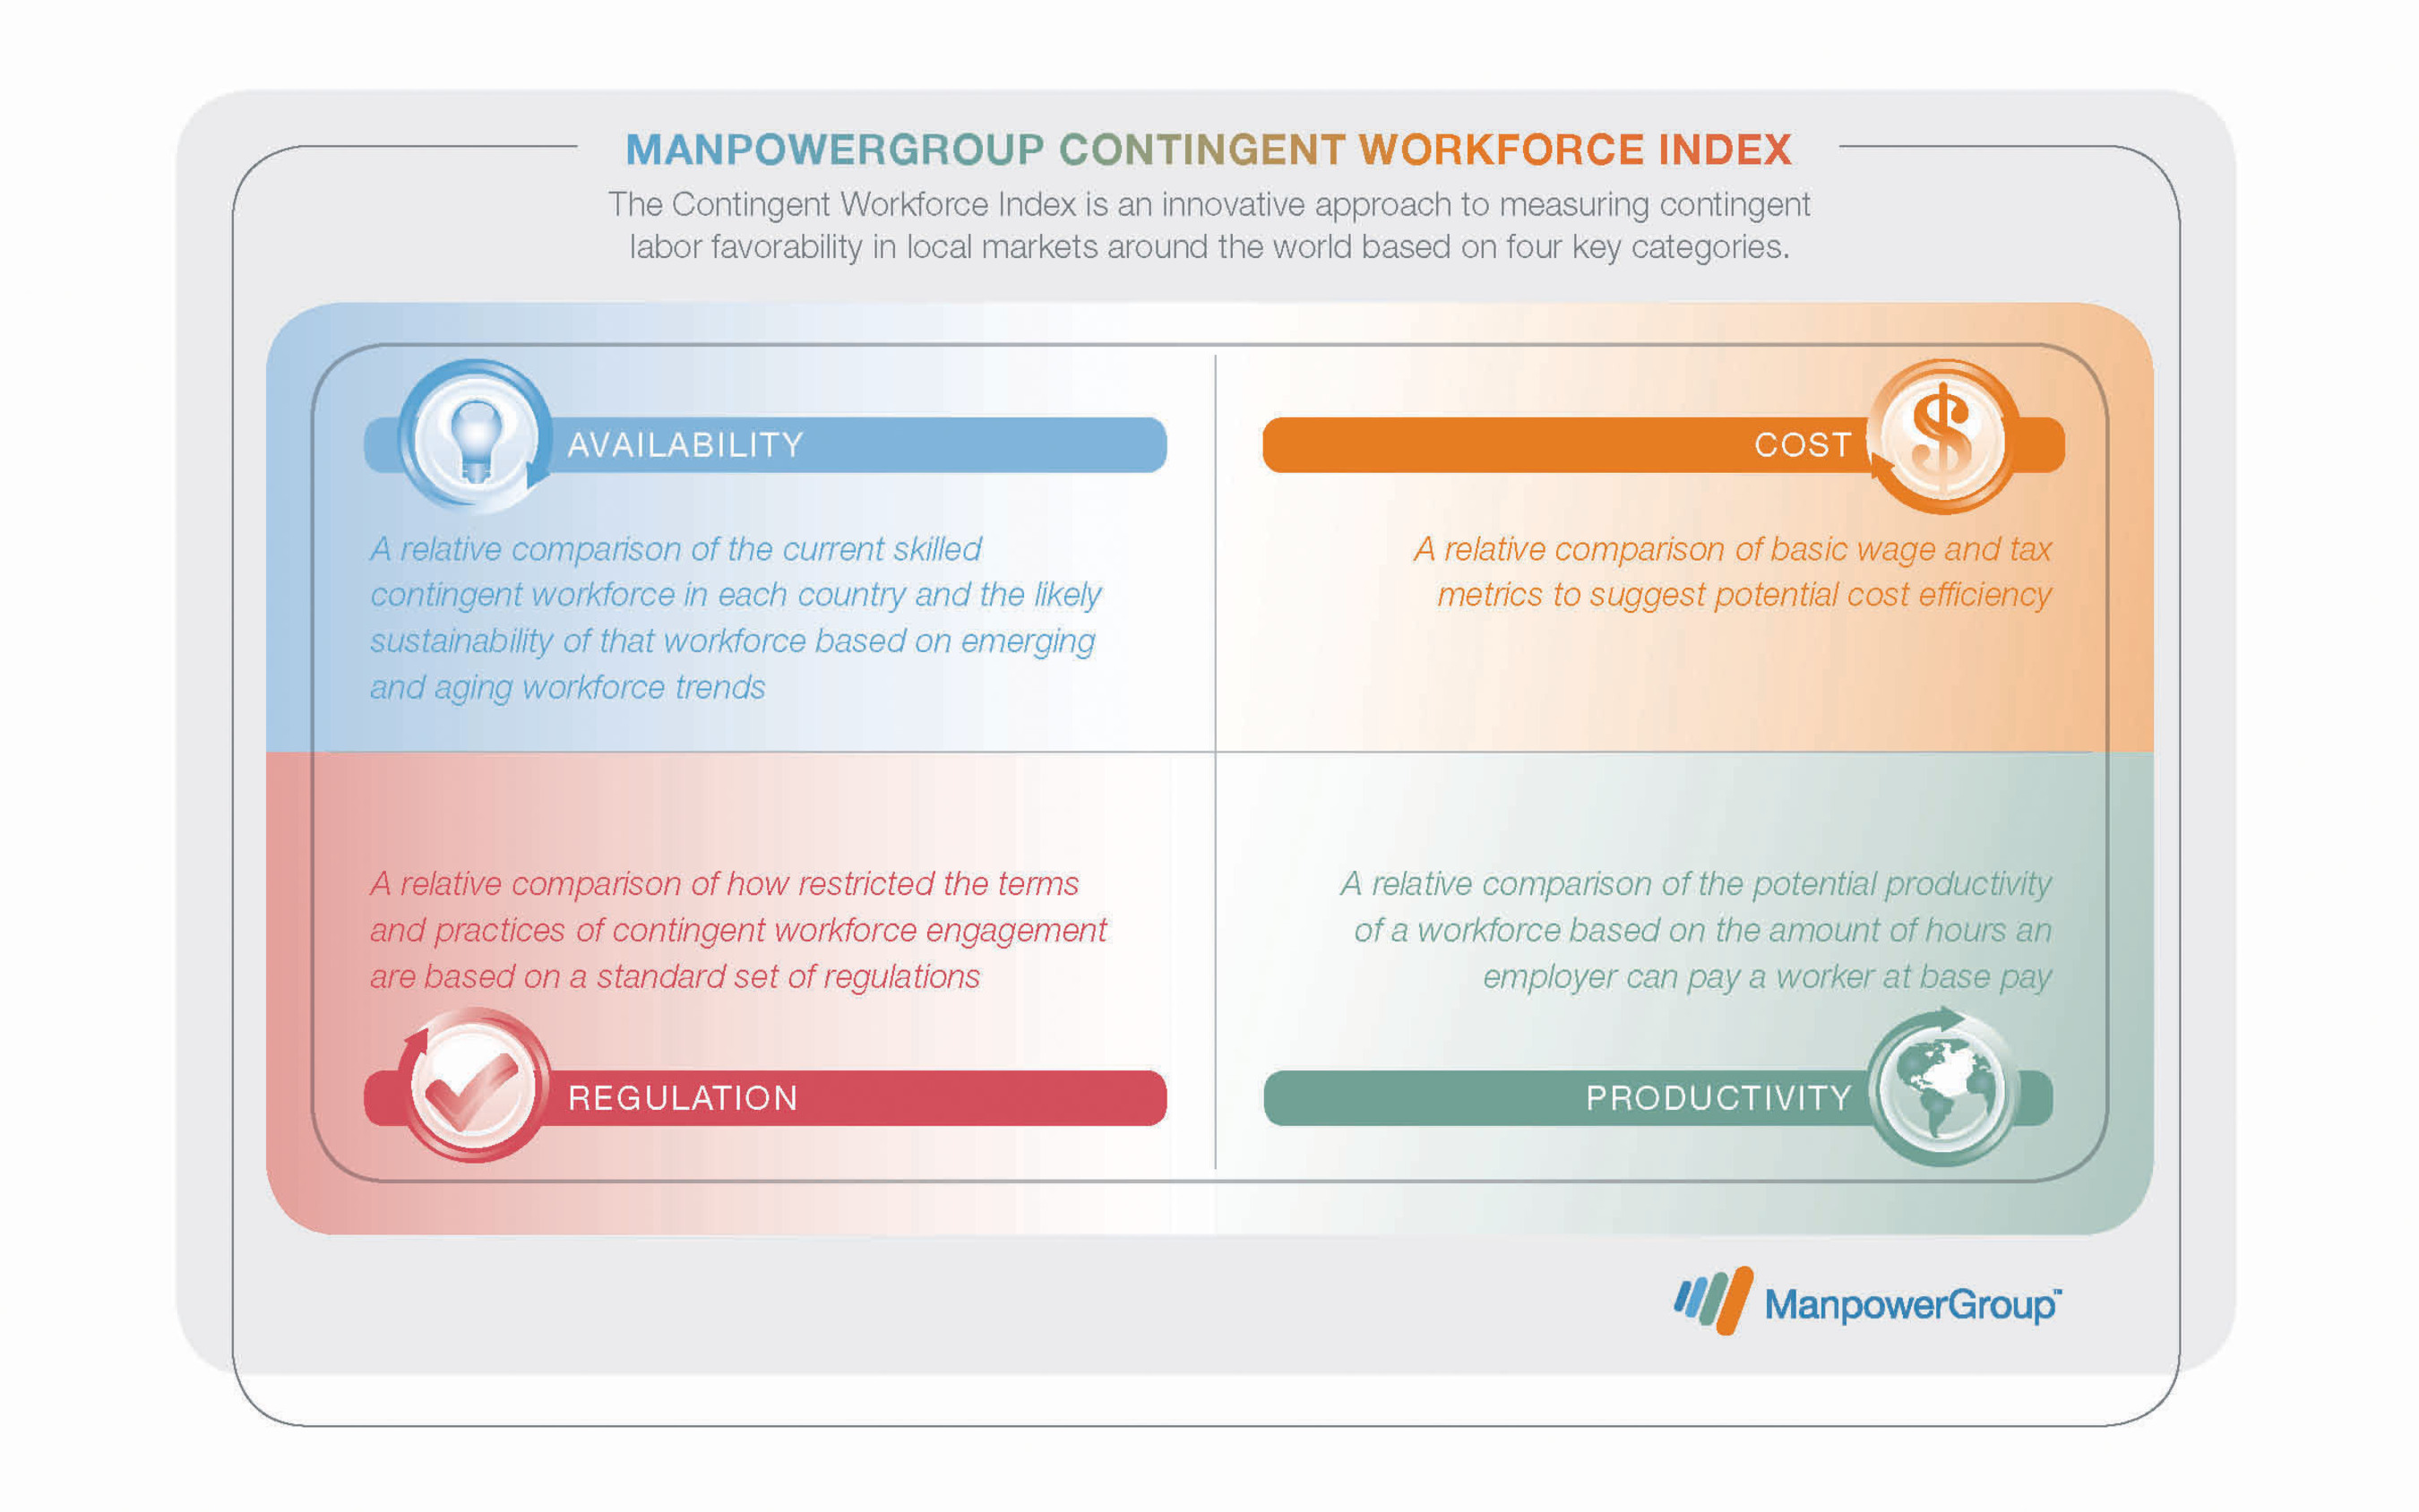 ManpowerGroup's Contingent Workforce Index is an innovative approach to measuring contingent labor favorability in local market around the world based on four key categories: availability, cost, regulation and productivity. (PRNewsFoto/TAPFIN) (PRNewsFoto/TAPFIN)